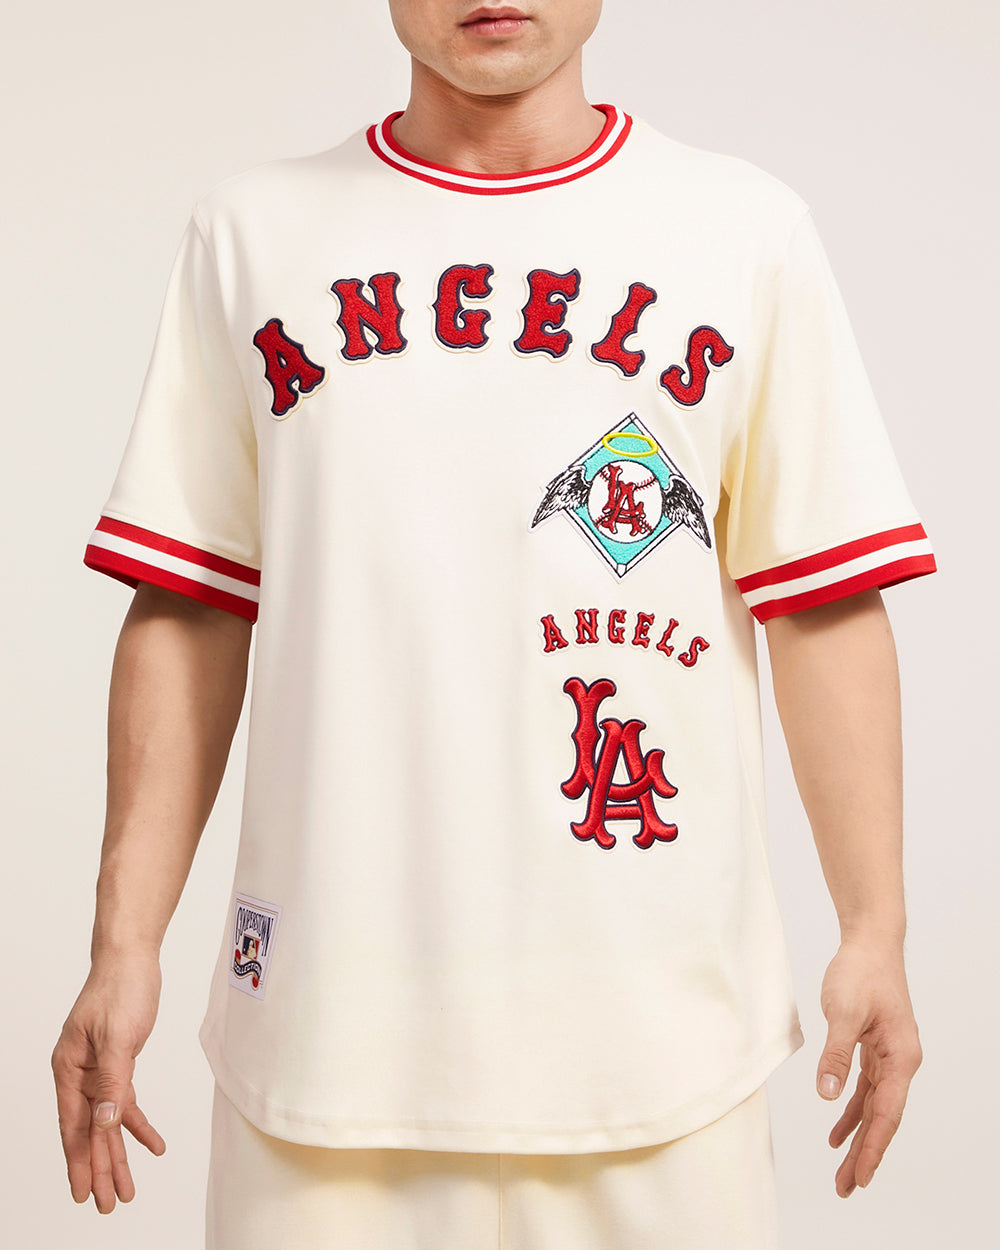 LOS ANGELES ANGELS CLASSIC DK TRACK JACKET (RED) – Pro Standard